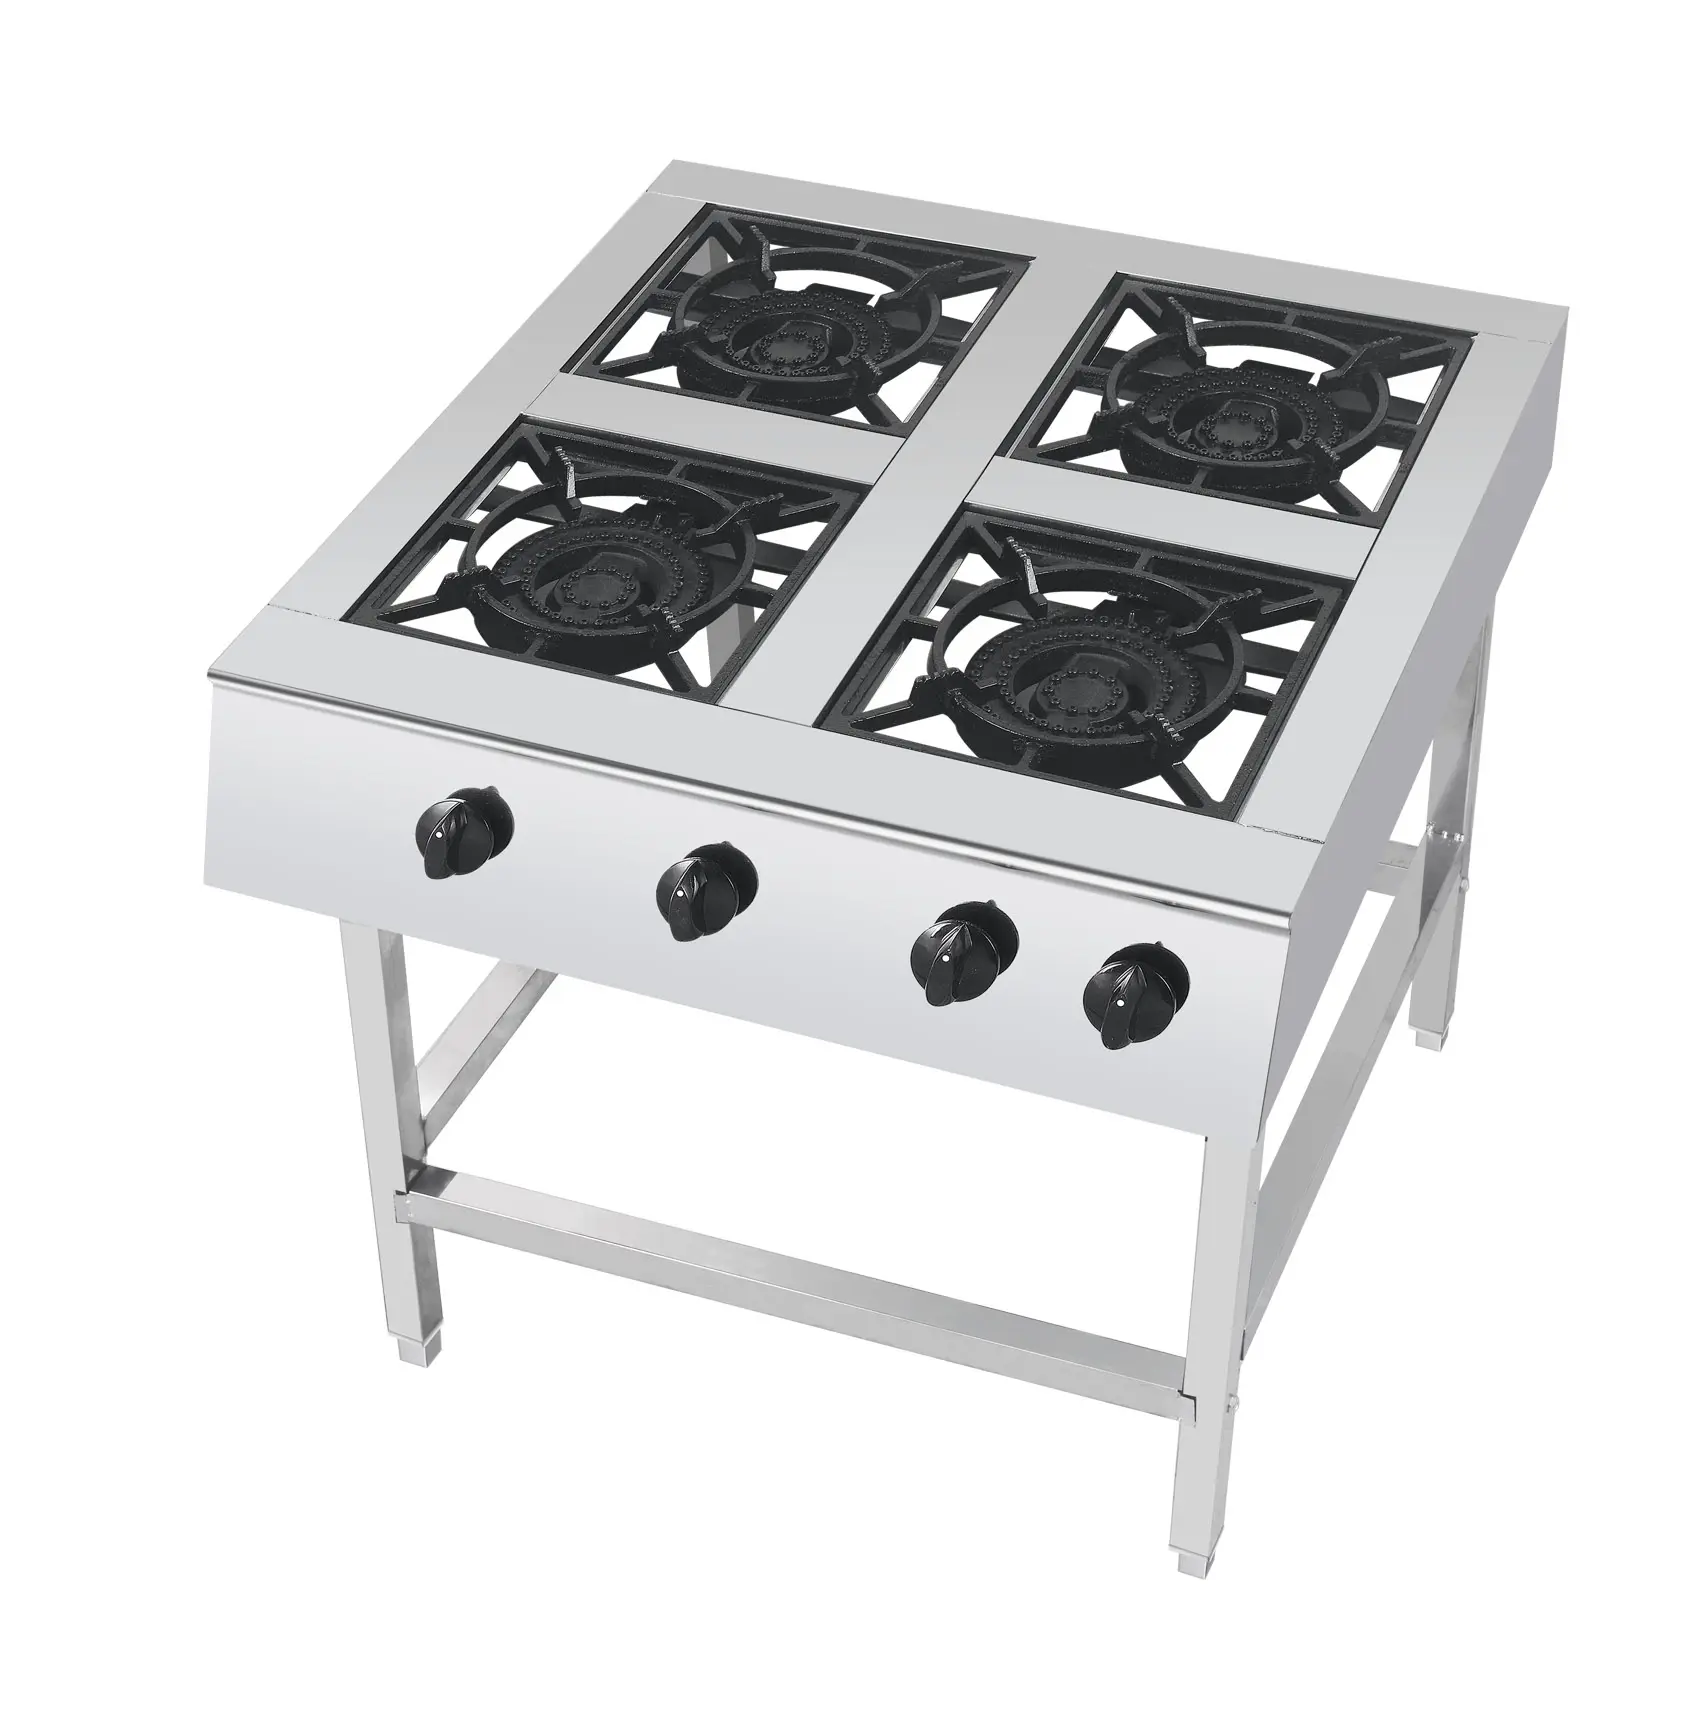 Four burners Low Pressure Gas Stove with Frame Stainless Steel body